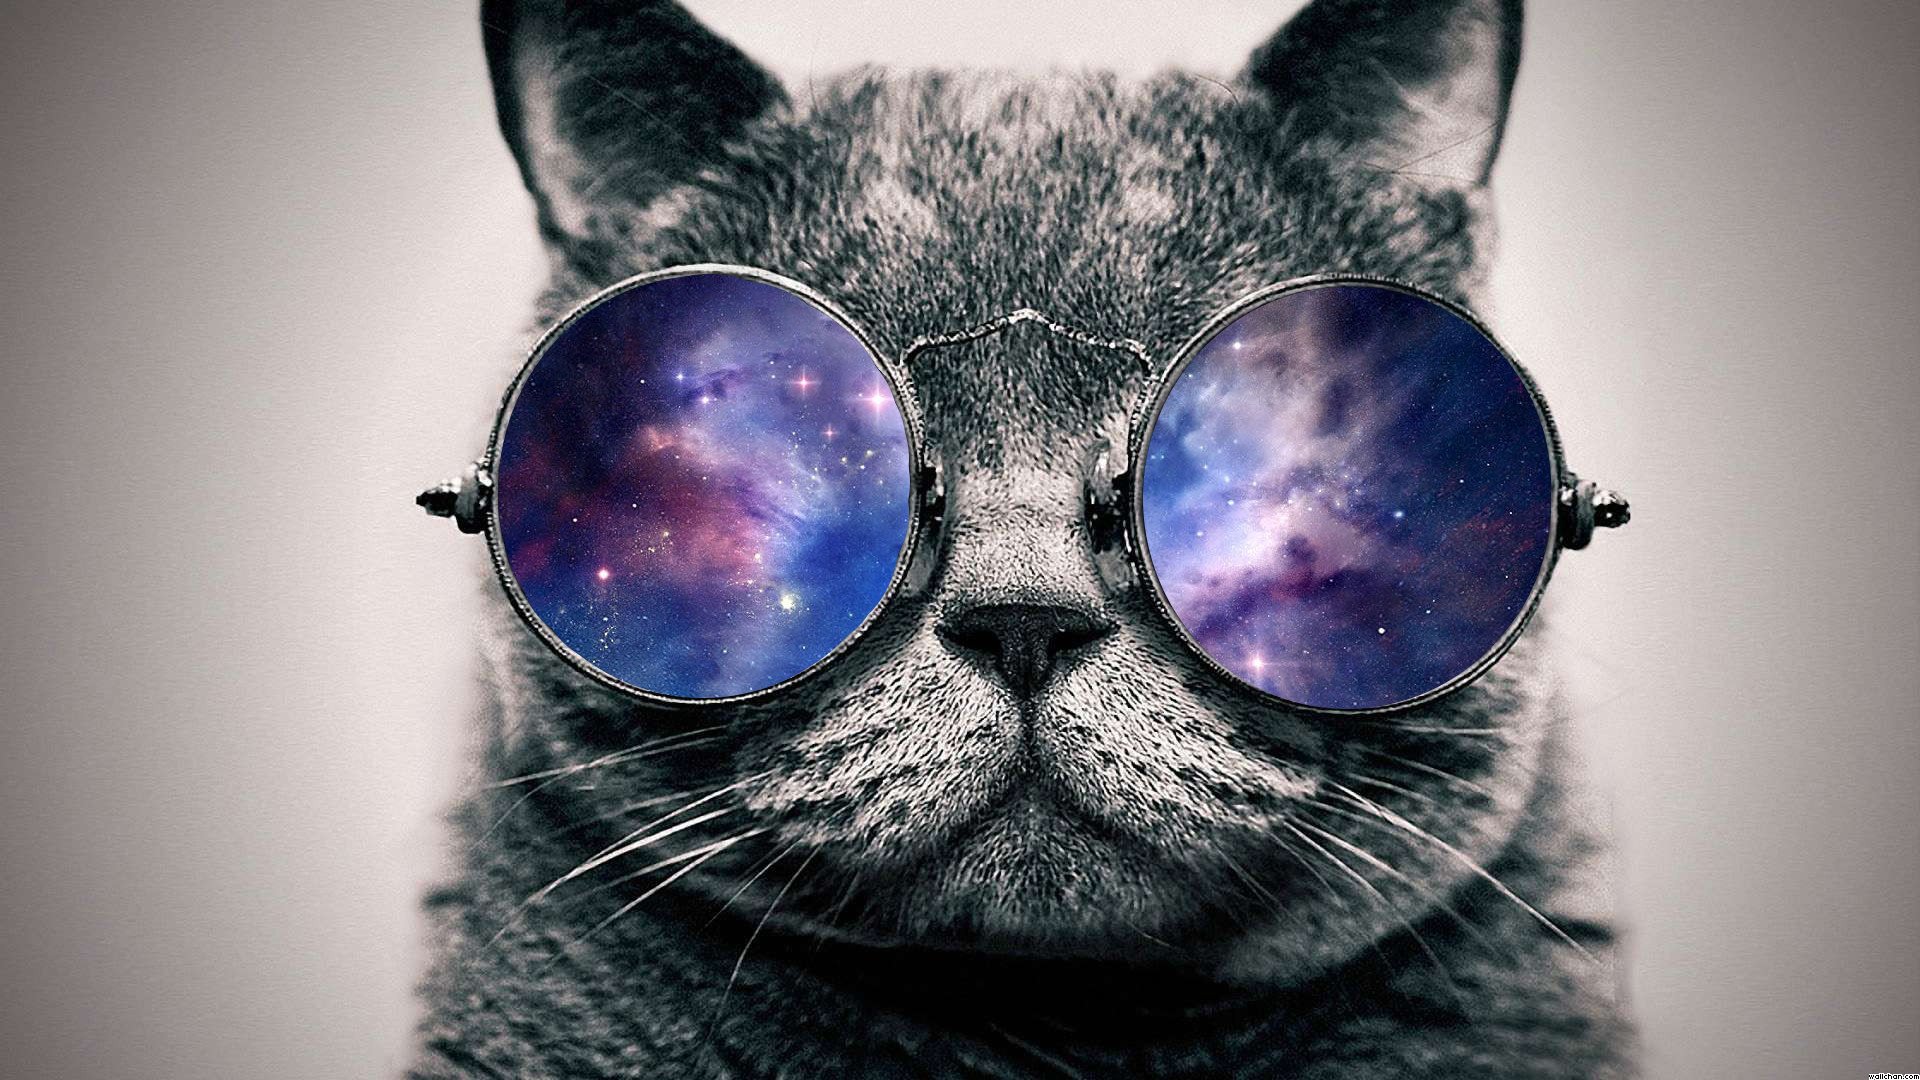 Cat in Space wallpapers and images   wallpapers pictures photos